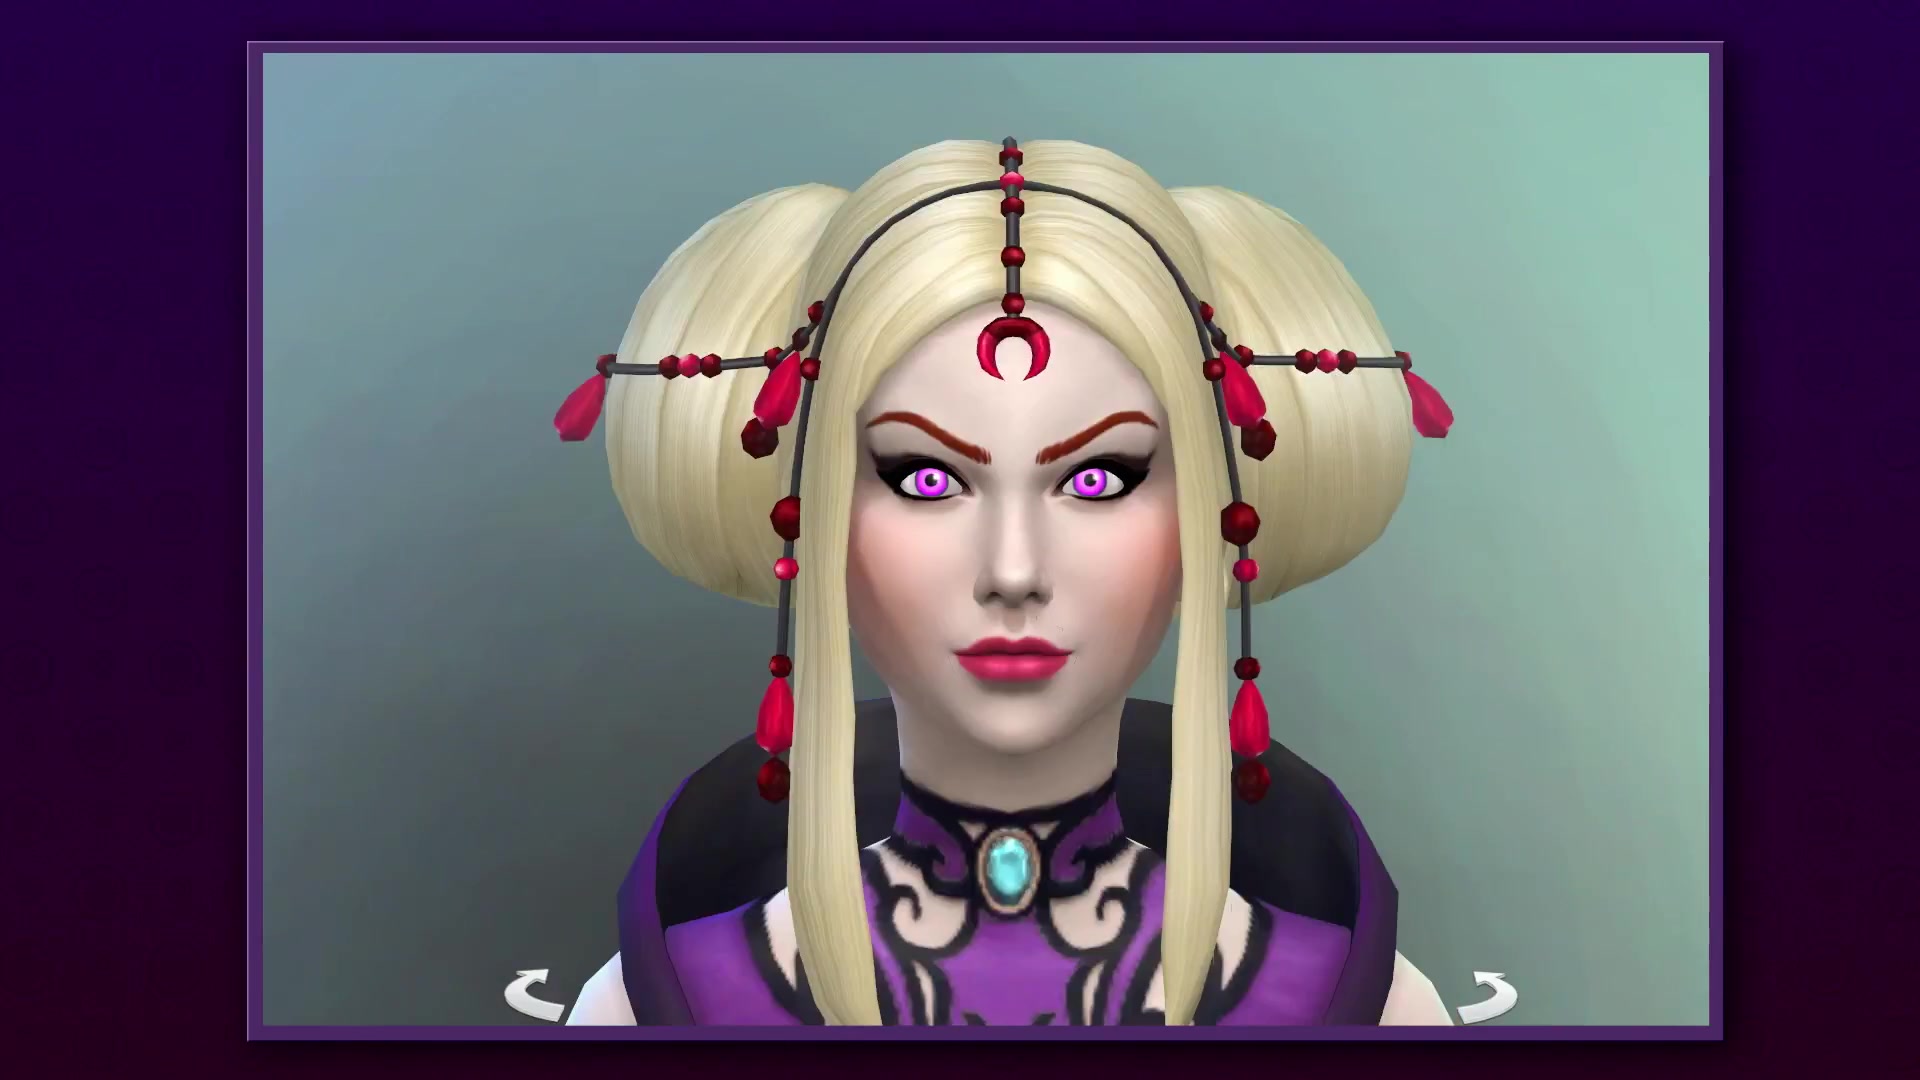 The Sims 4 Vampires Official Trailer 0545 Simsvip - www.vrogue.co